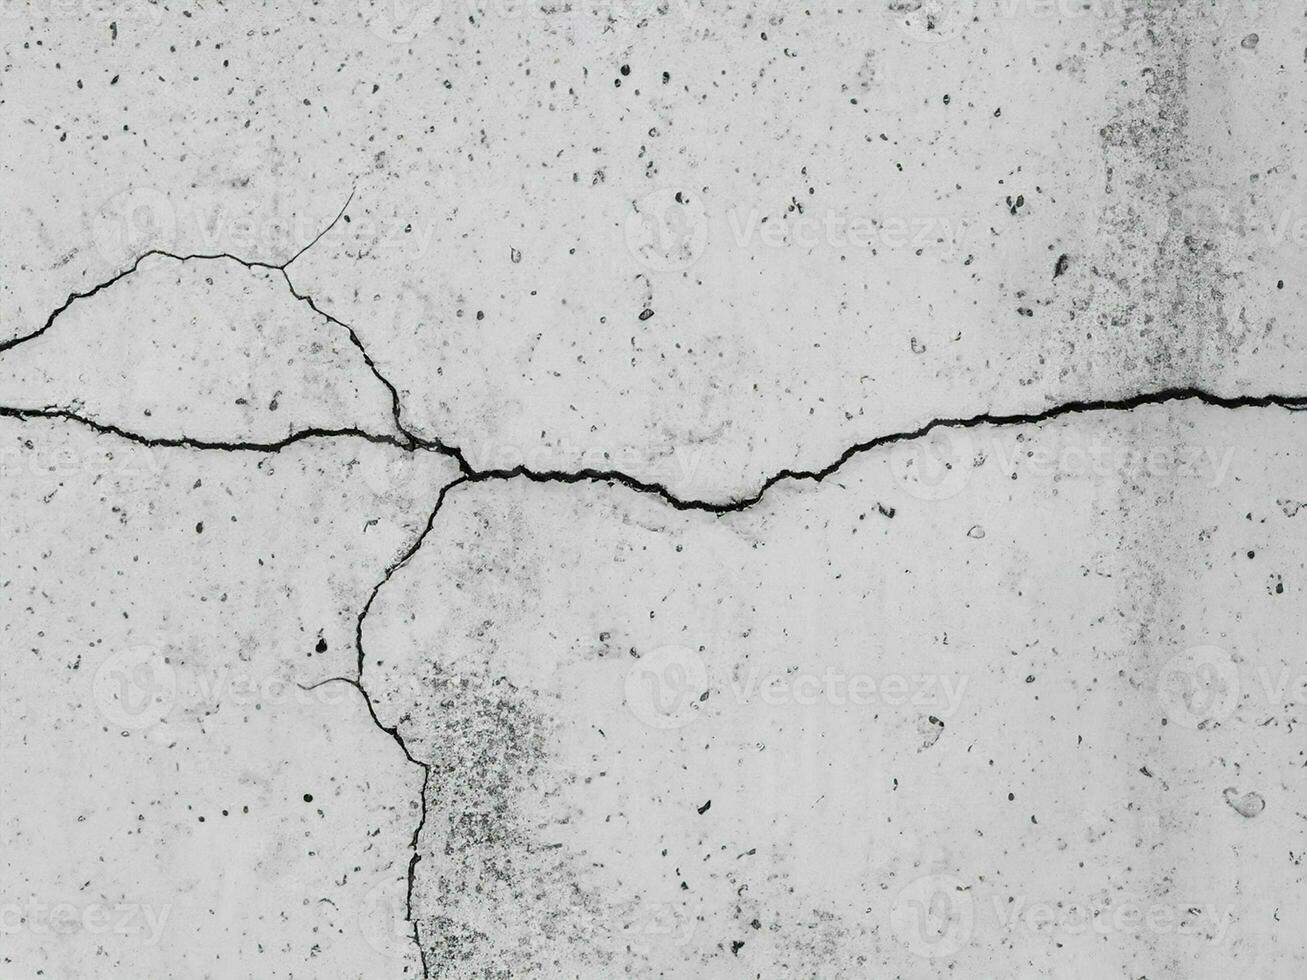 close up cracked concrete wall background photo